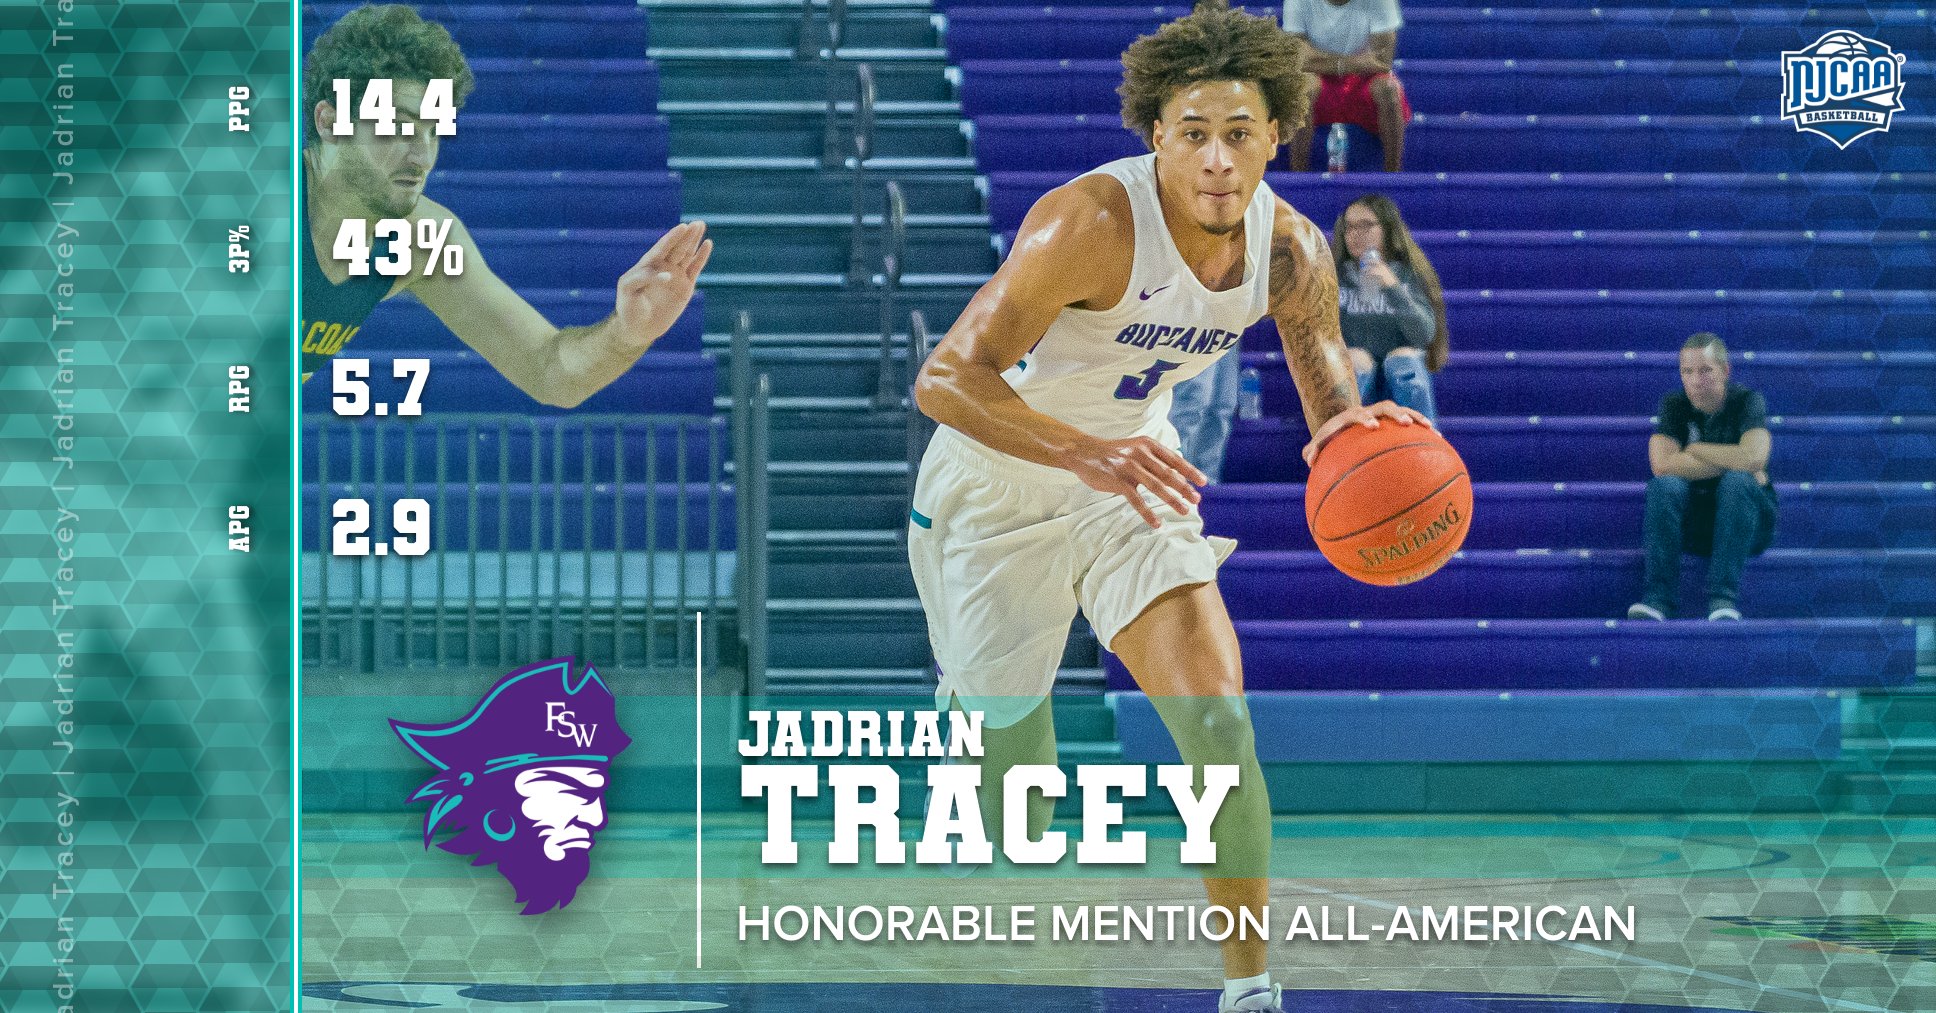 Tracey Tabbed Honorable Mention All-American